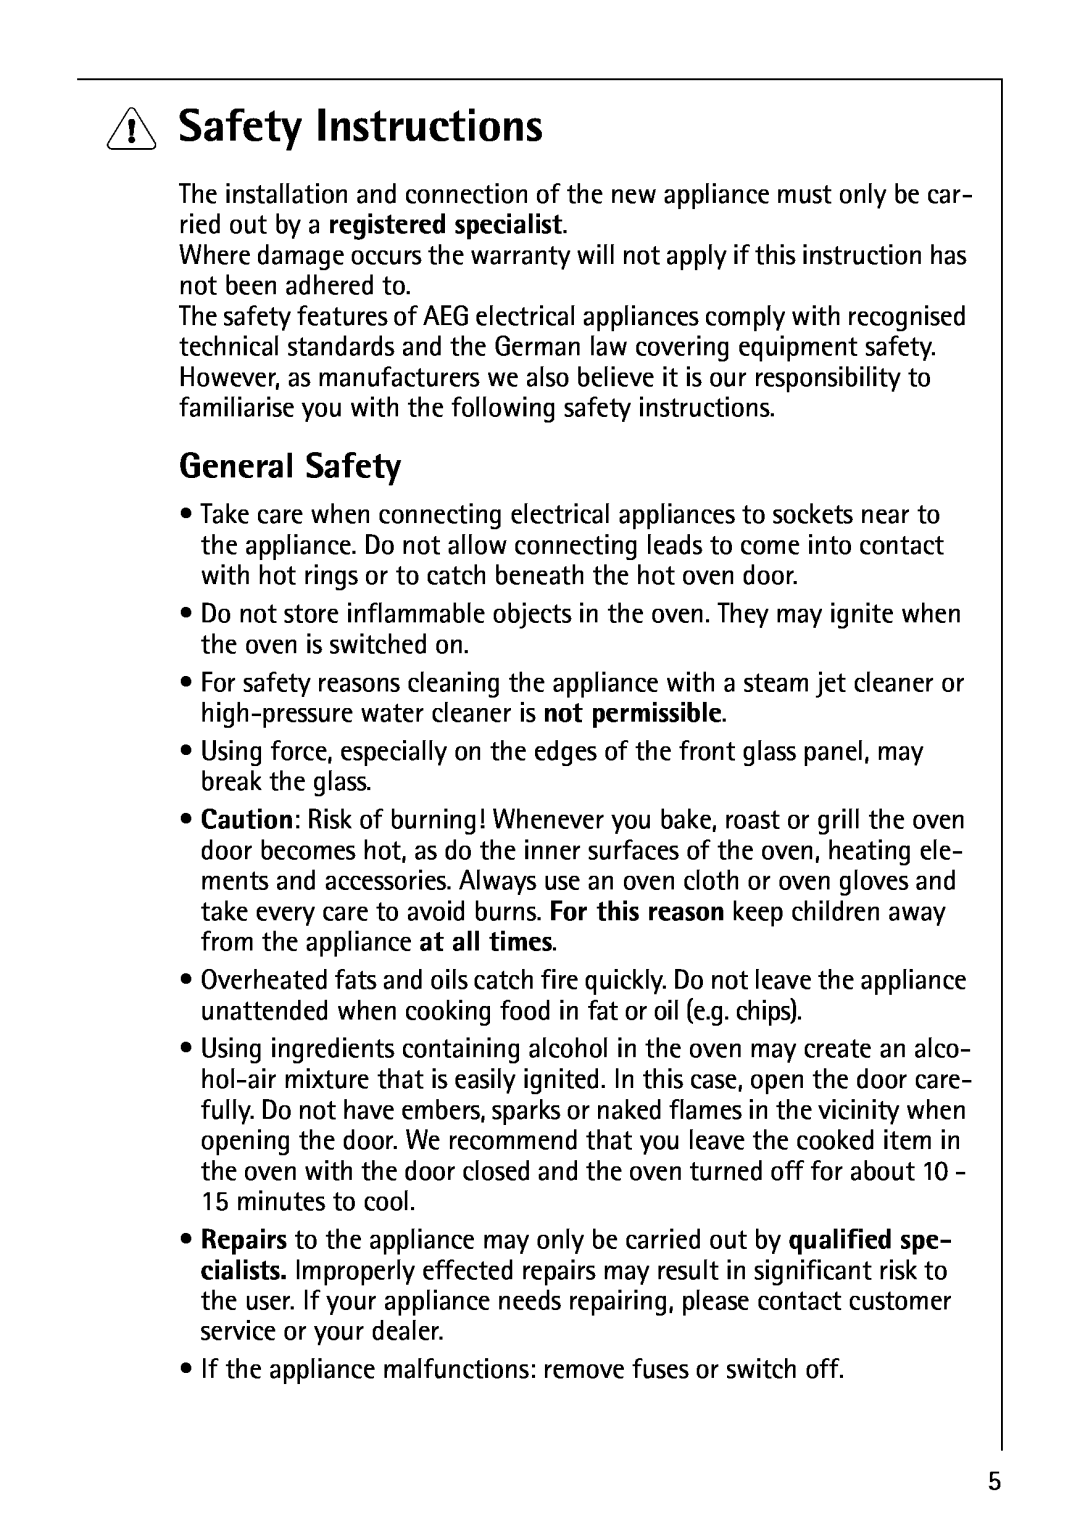 AEG E3100-1 manual 1Safety Instructions, General Safety 